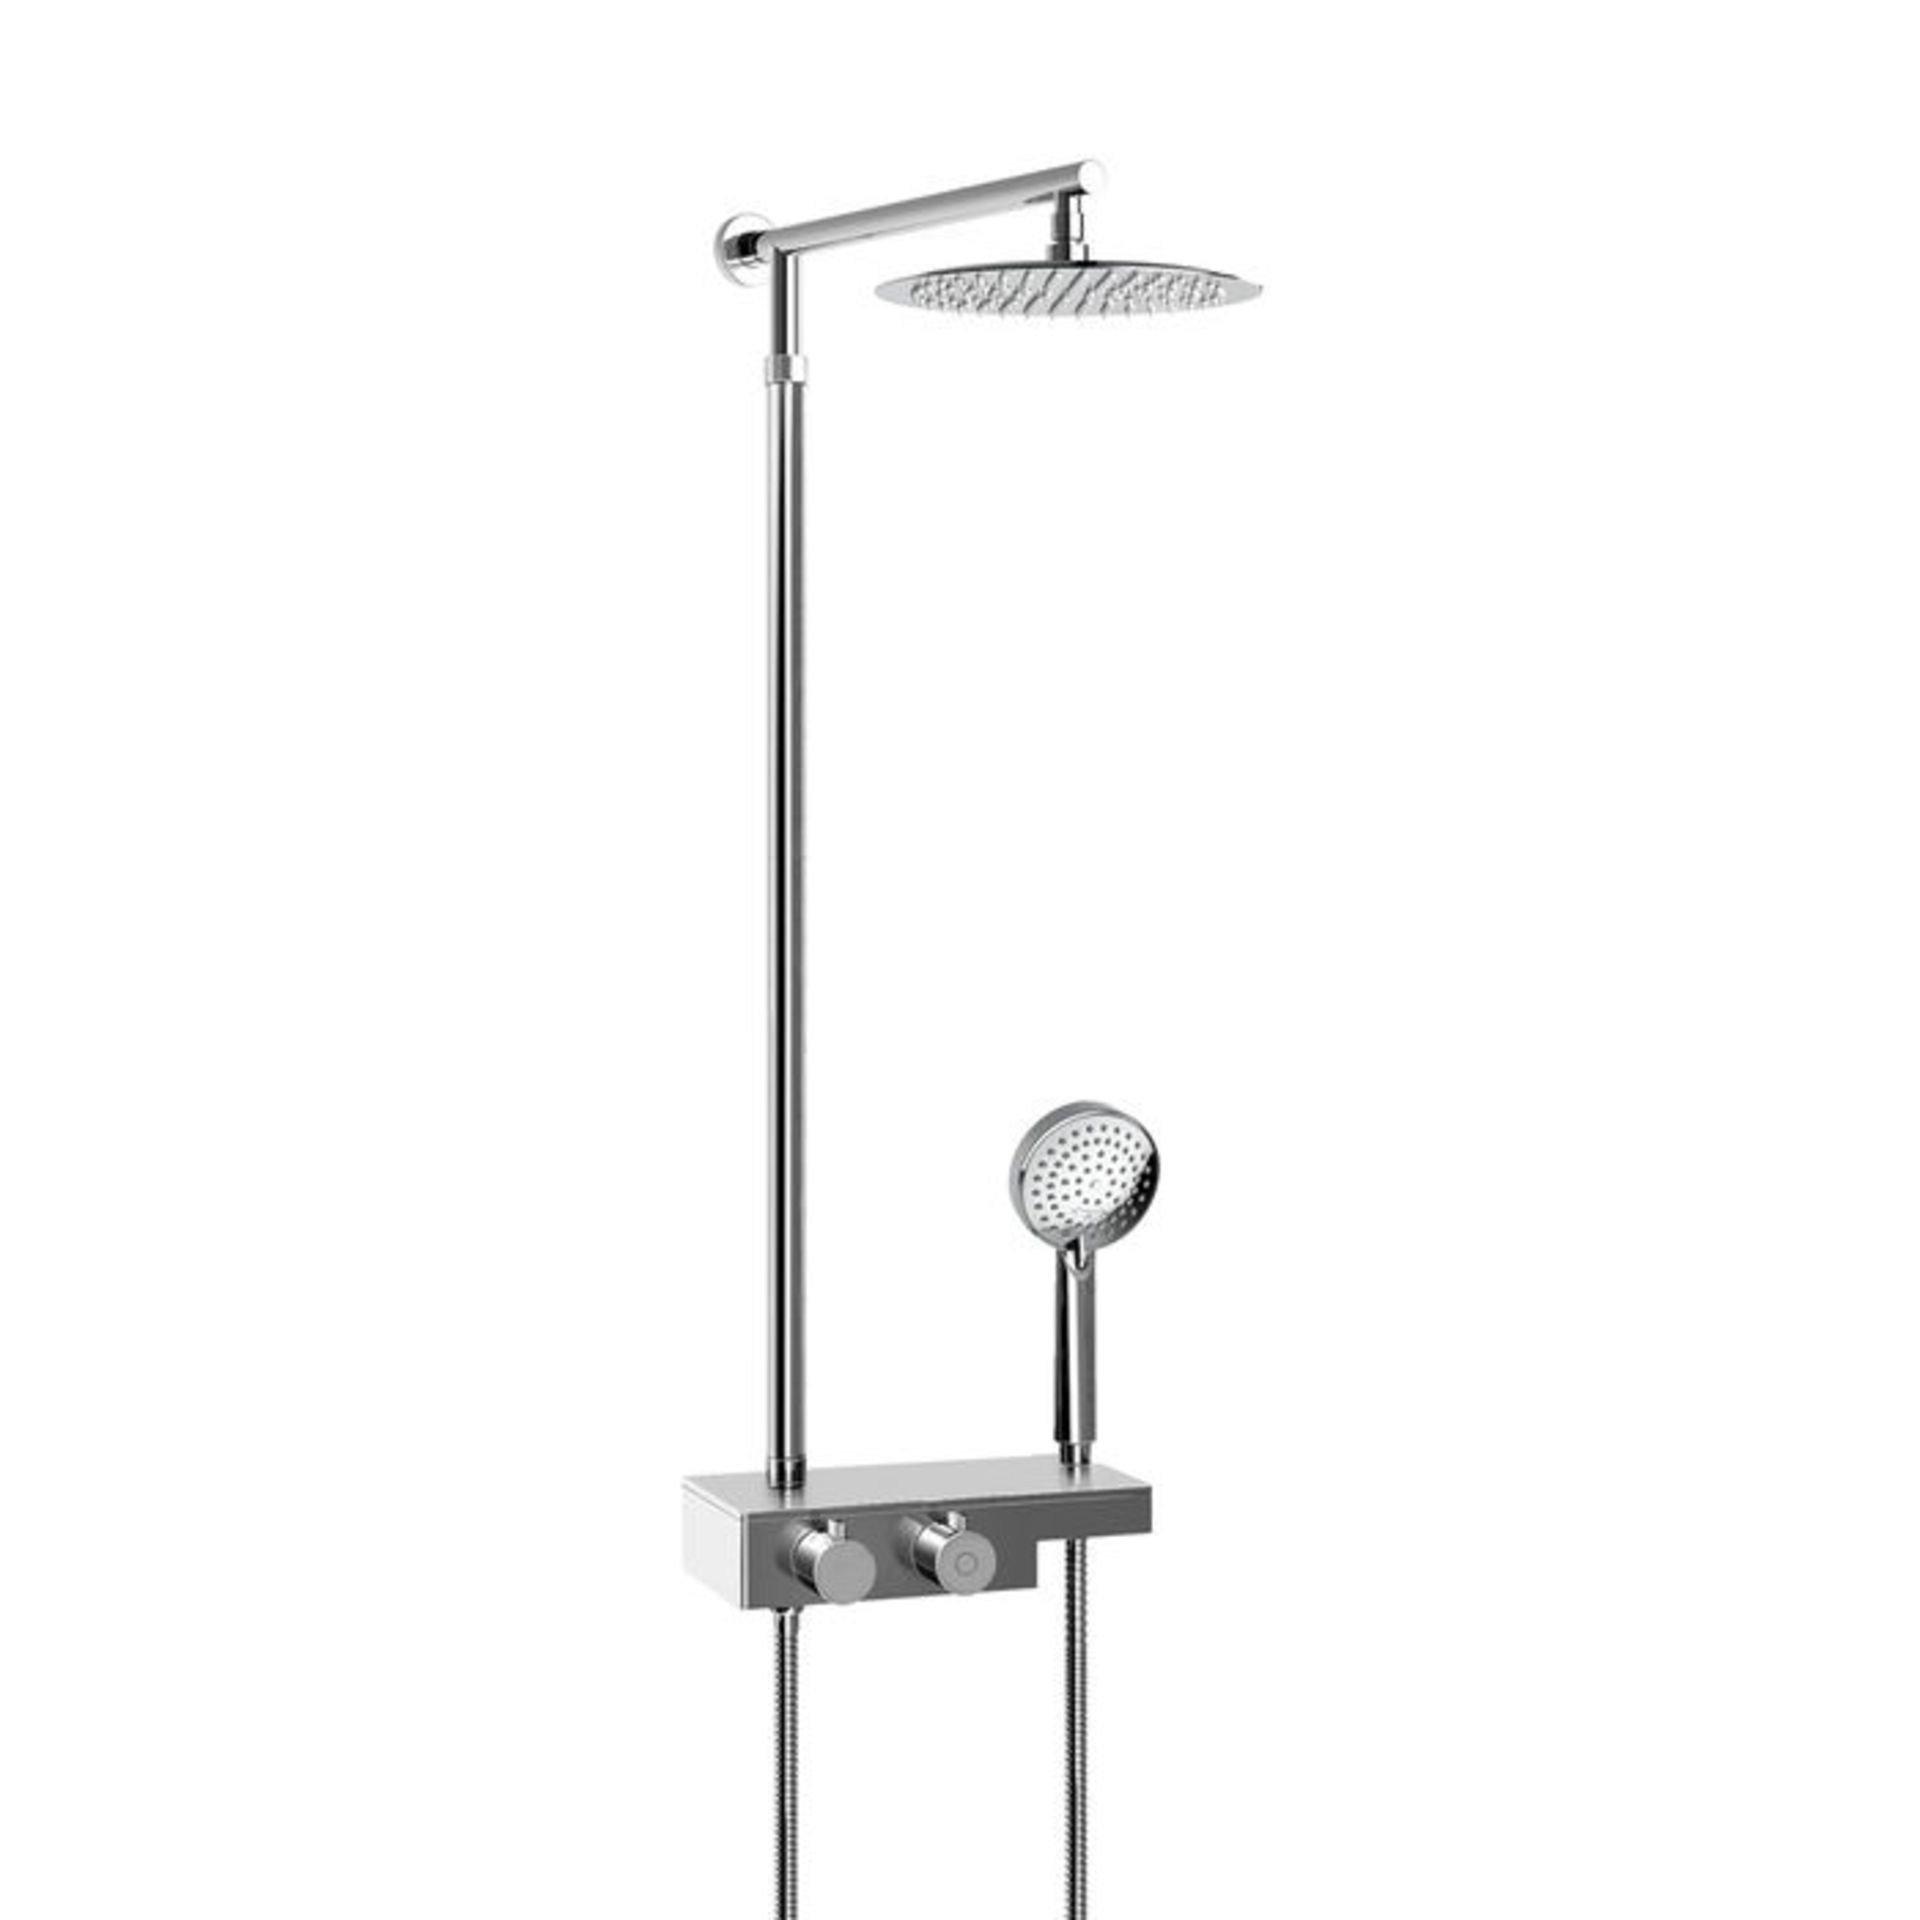 (KL36) Round Exposed Thermostatic Mixer Shower Kit & Large Head. Cool to touch shower for additional - Image 2 of 4